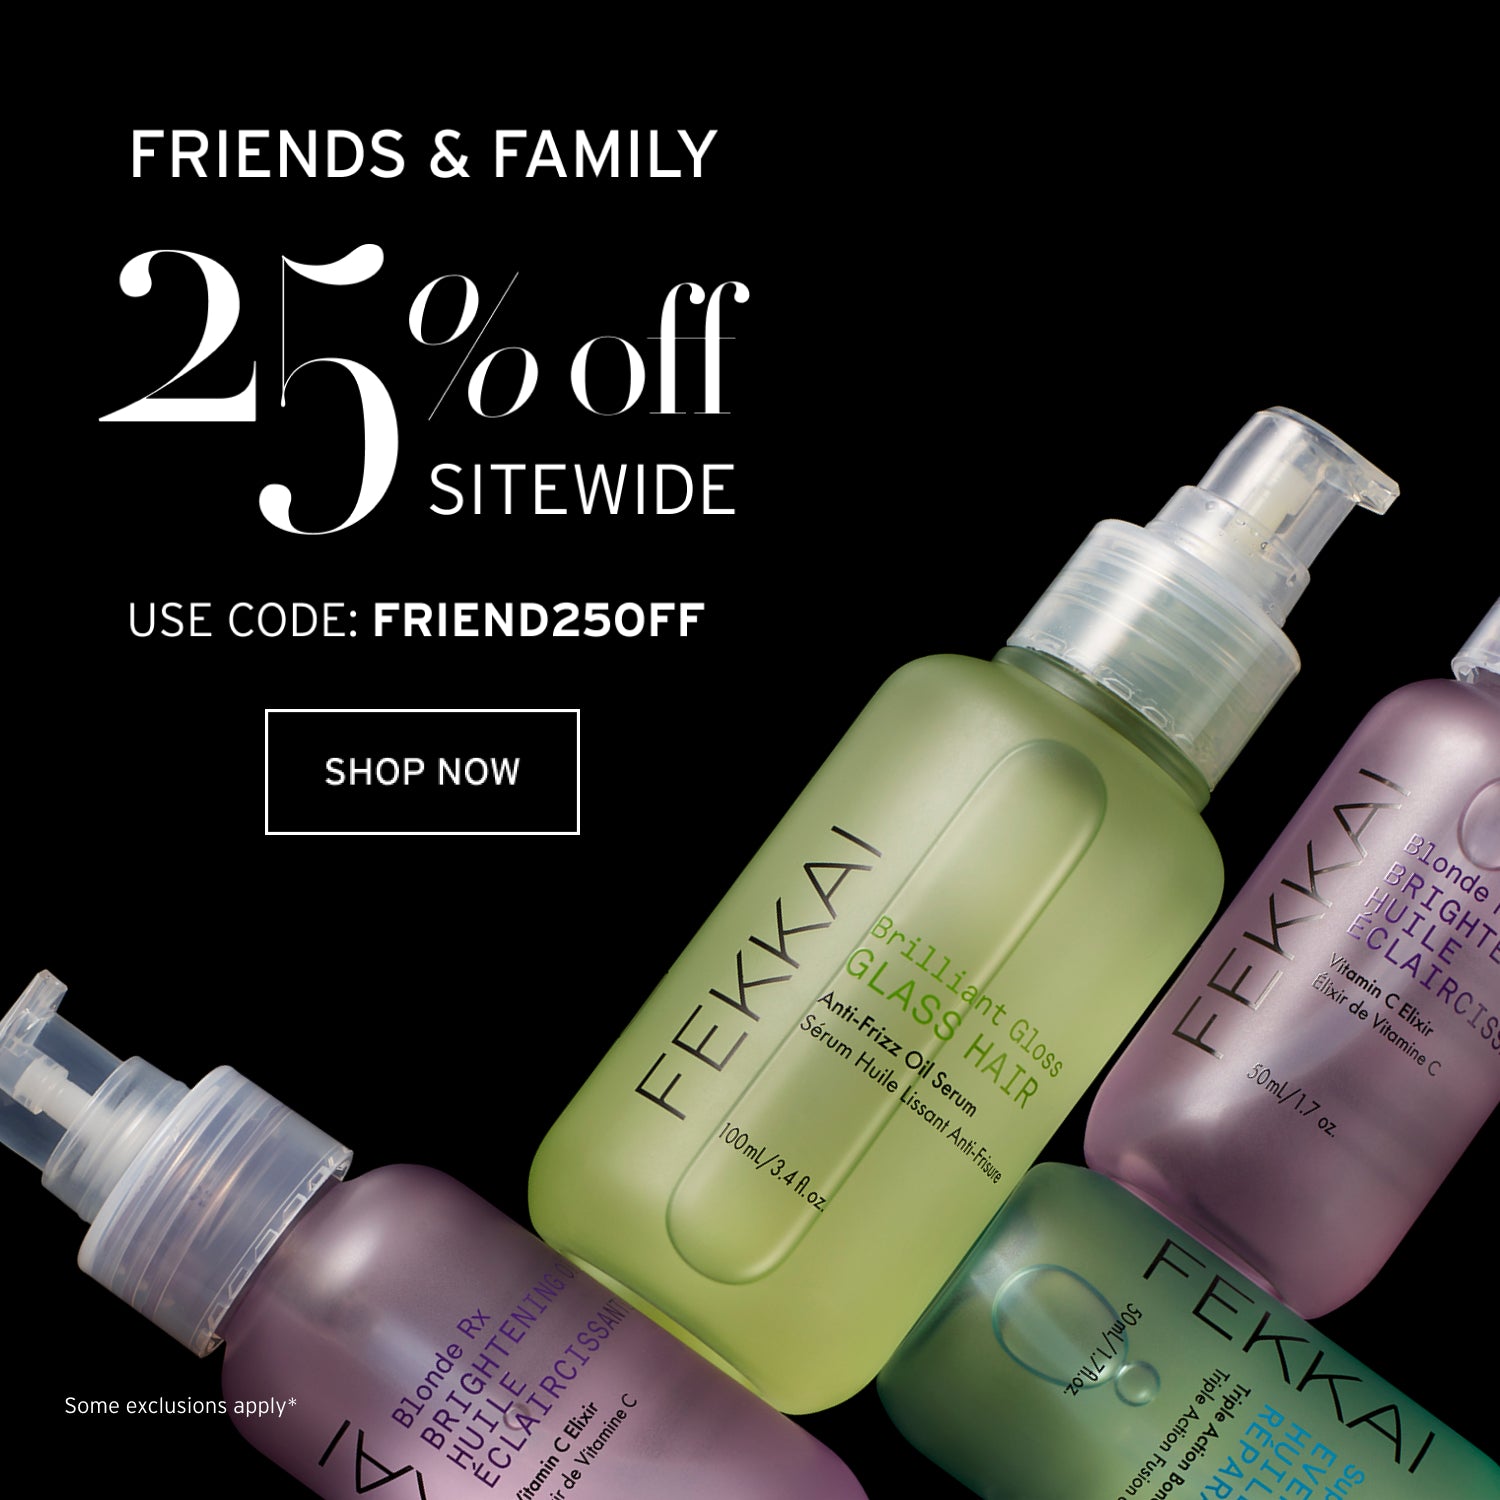 Friends & Family 25% off Sitewide Use Code: FRIEND25OFF